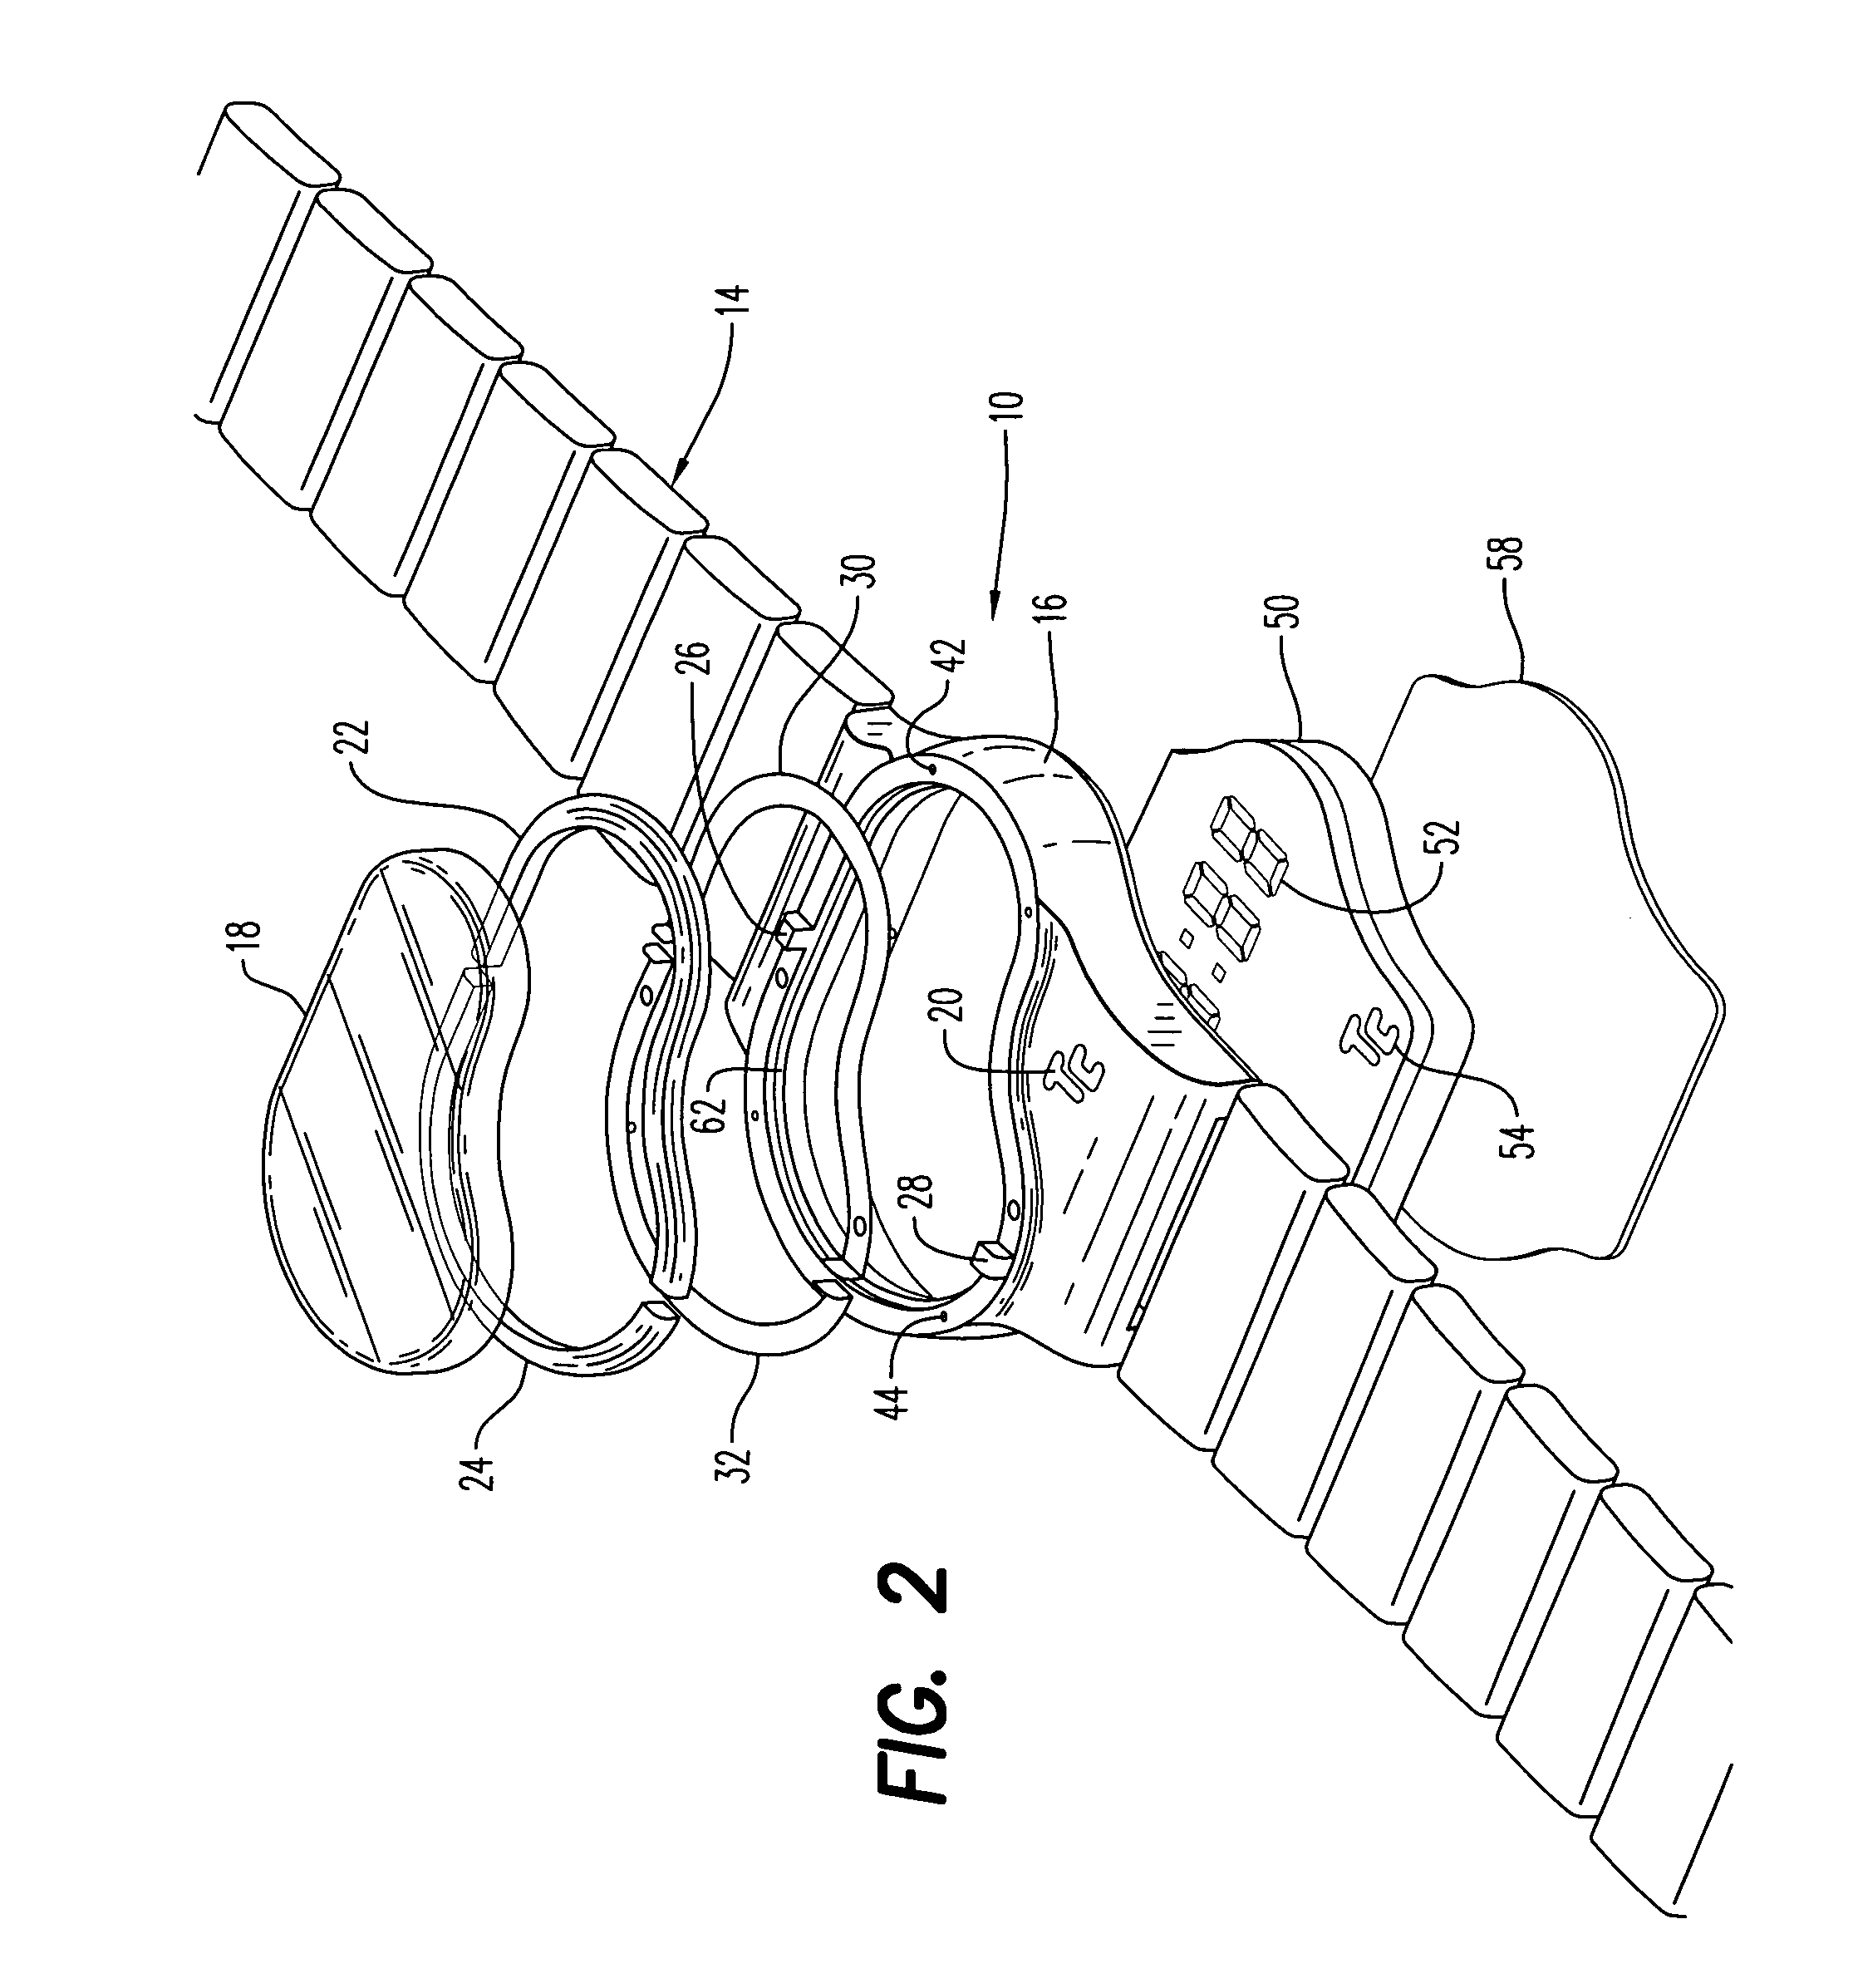 Electronic timepiece with inverted digital display